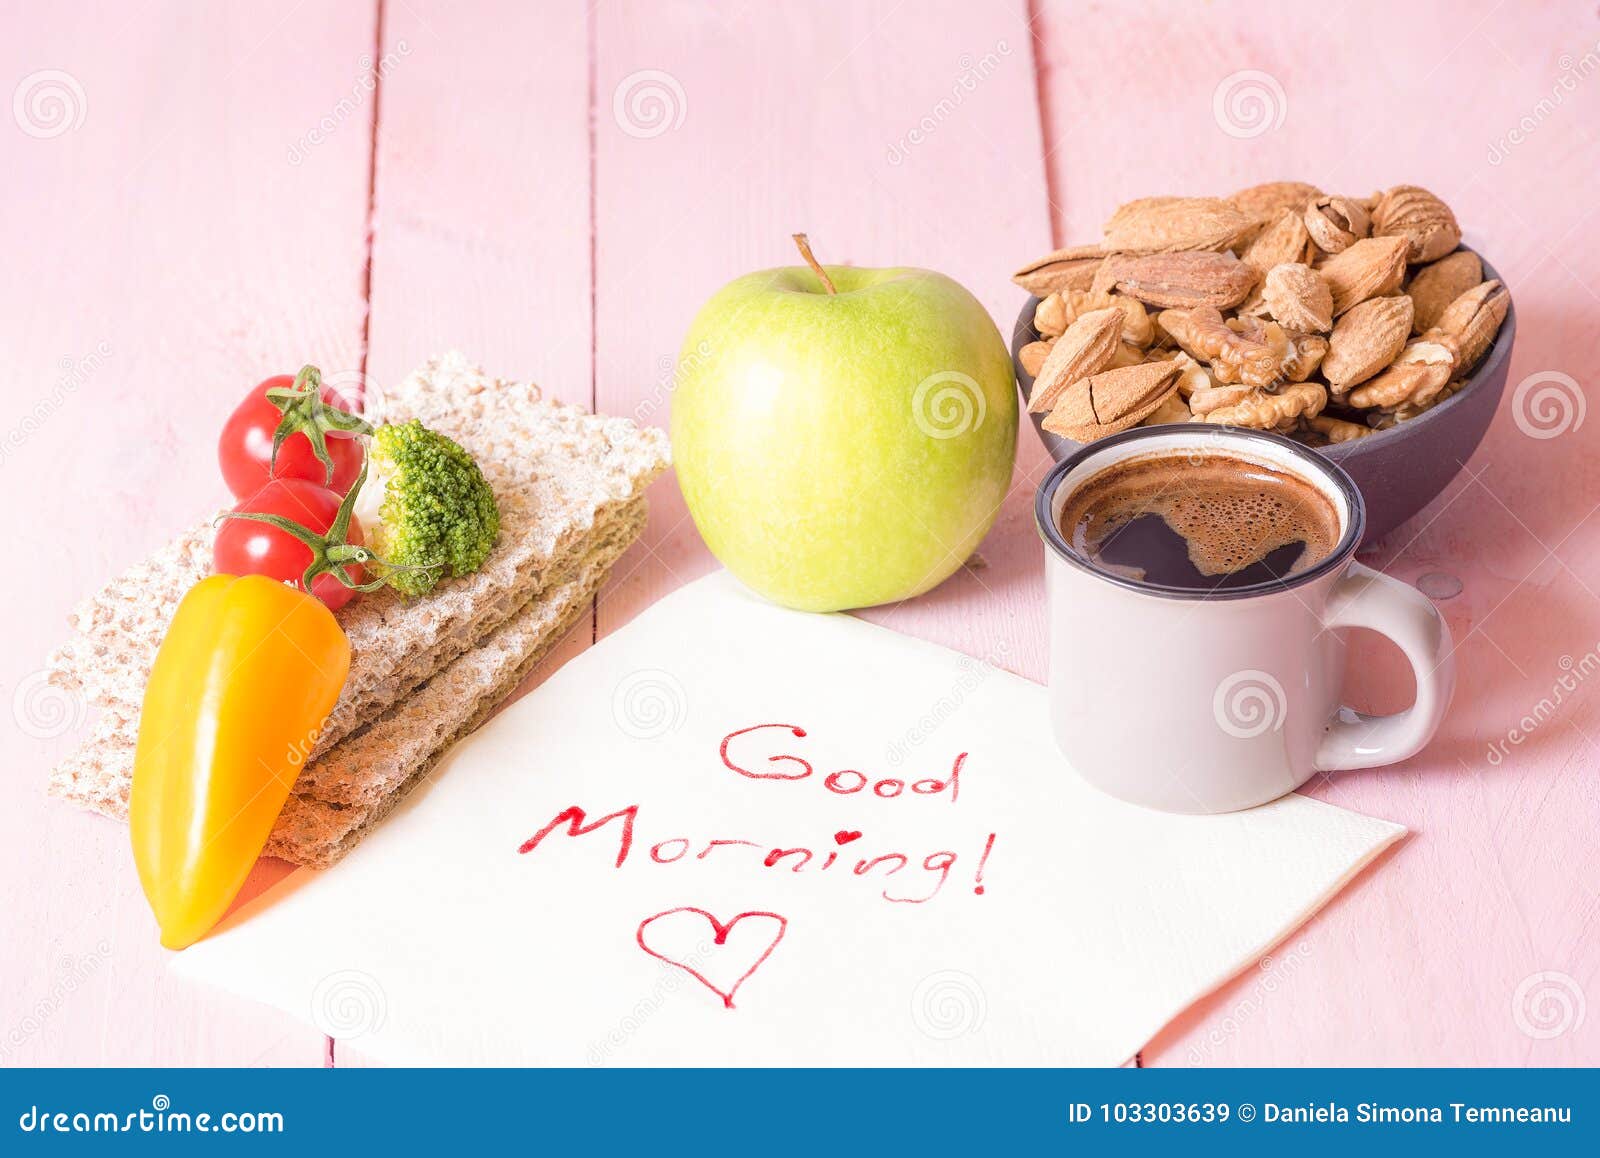 Healthy Food and Good Morning Text Stock Image - Image of happy ...